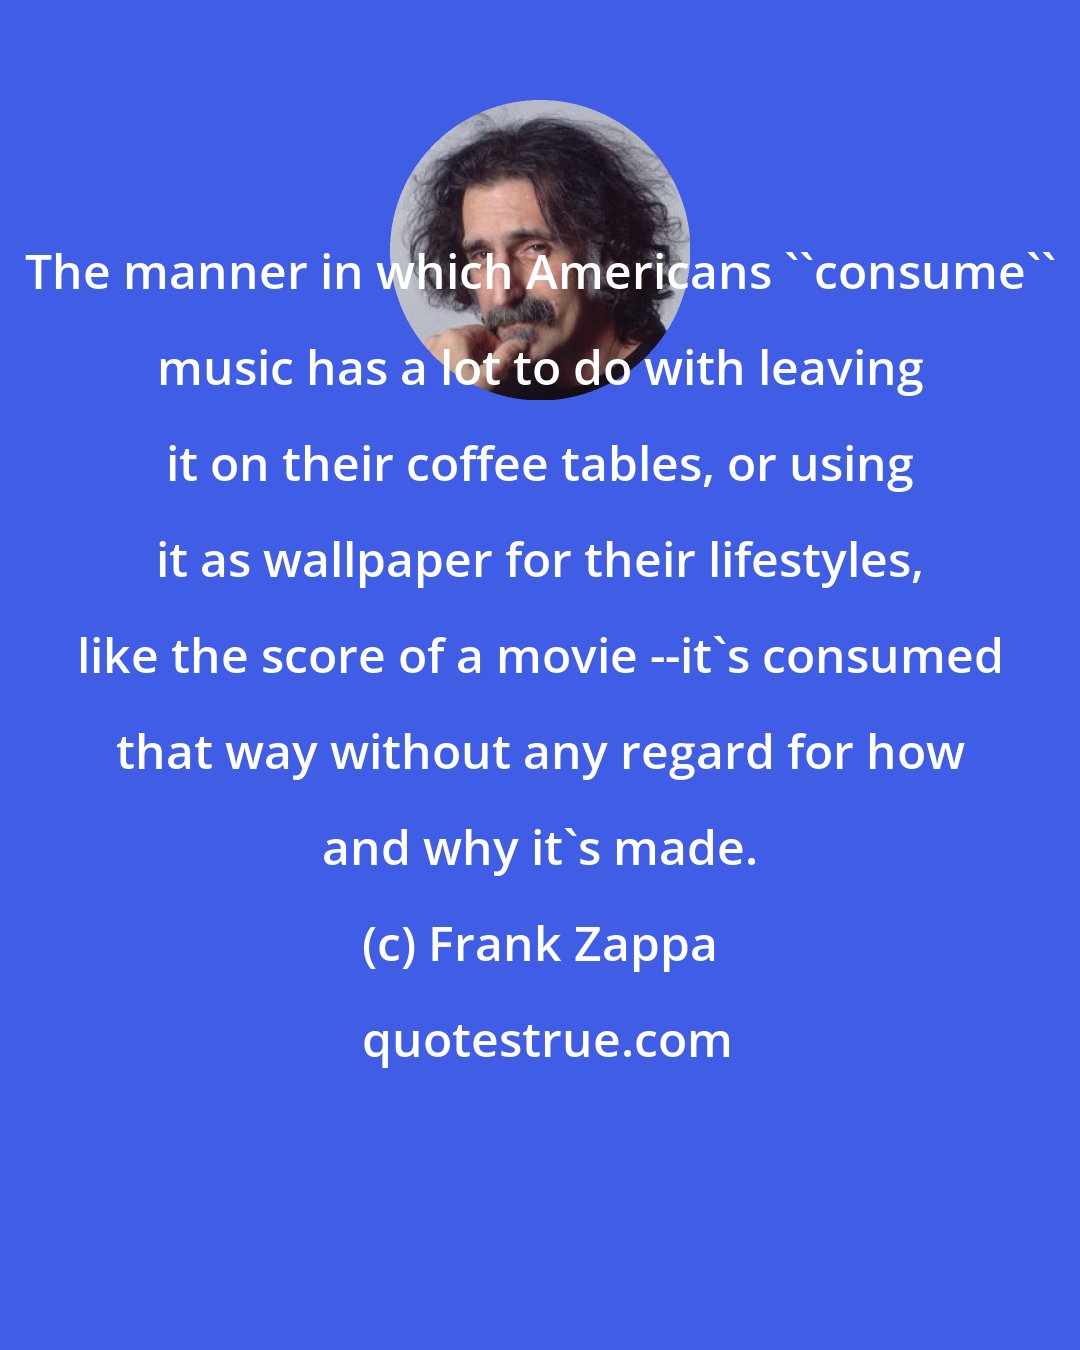 Frank Zappa: The manner in which Americans ''consume'' music has a lot to do with leaving it on their coffee tables, or using it as wallpaper for their lifestyles, like the score of a movie --it's consumed that way without any regard for how and why it's made.